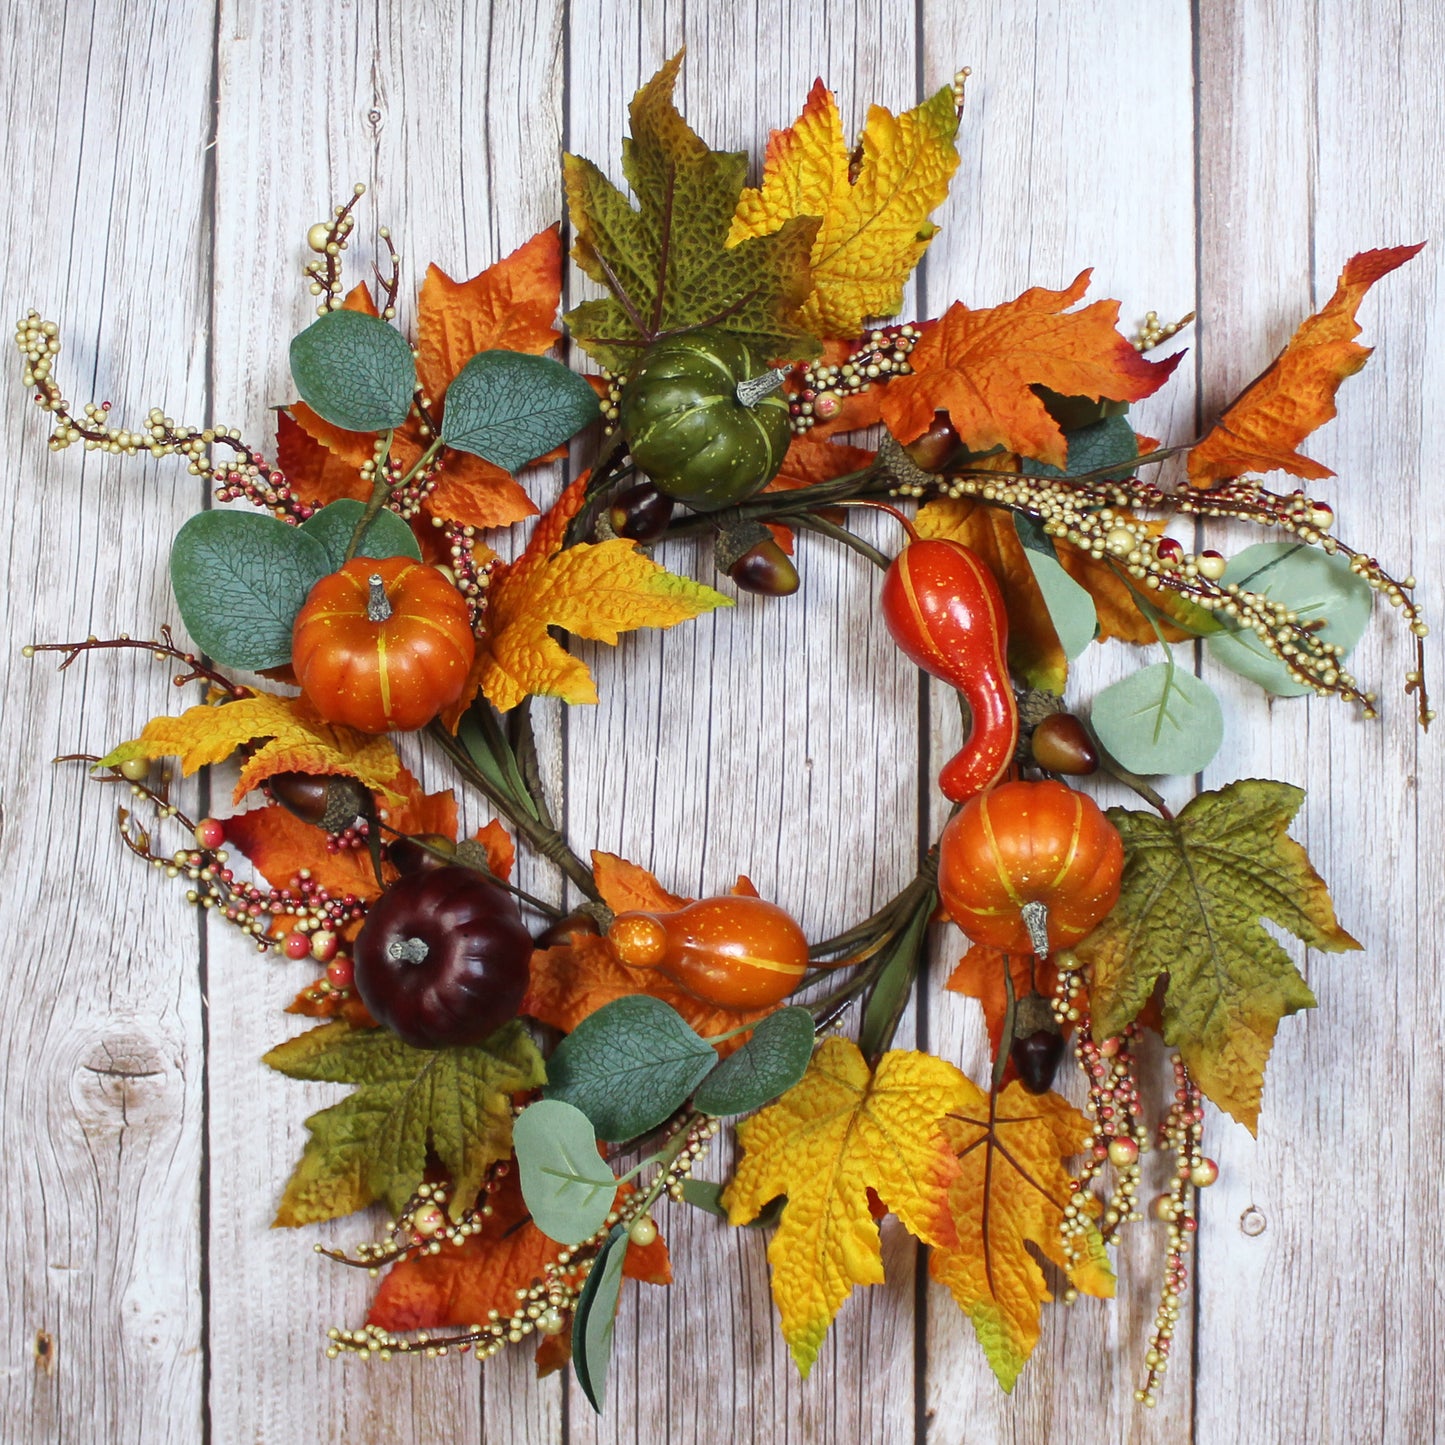 CVHOMEDECO. Primitive Rustic 14 Inch Artificial Pumpkins Wreath with Fall Maple Leaves and Berry, Harvest Festival Wreath for Front Door and Home Decor.